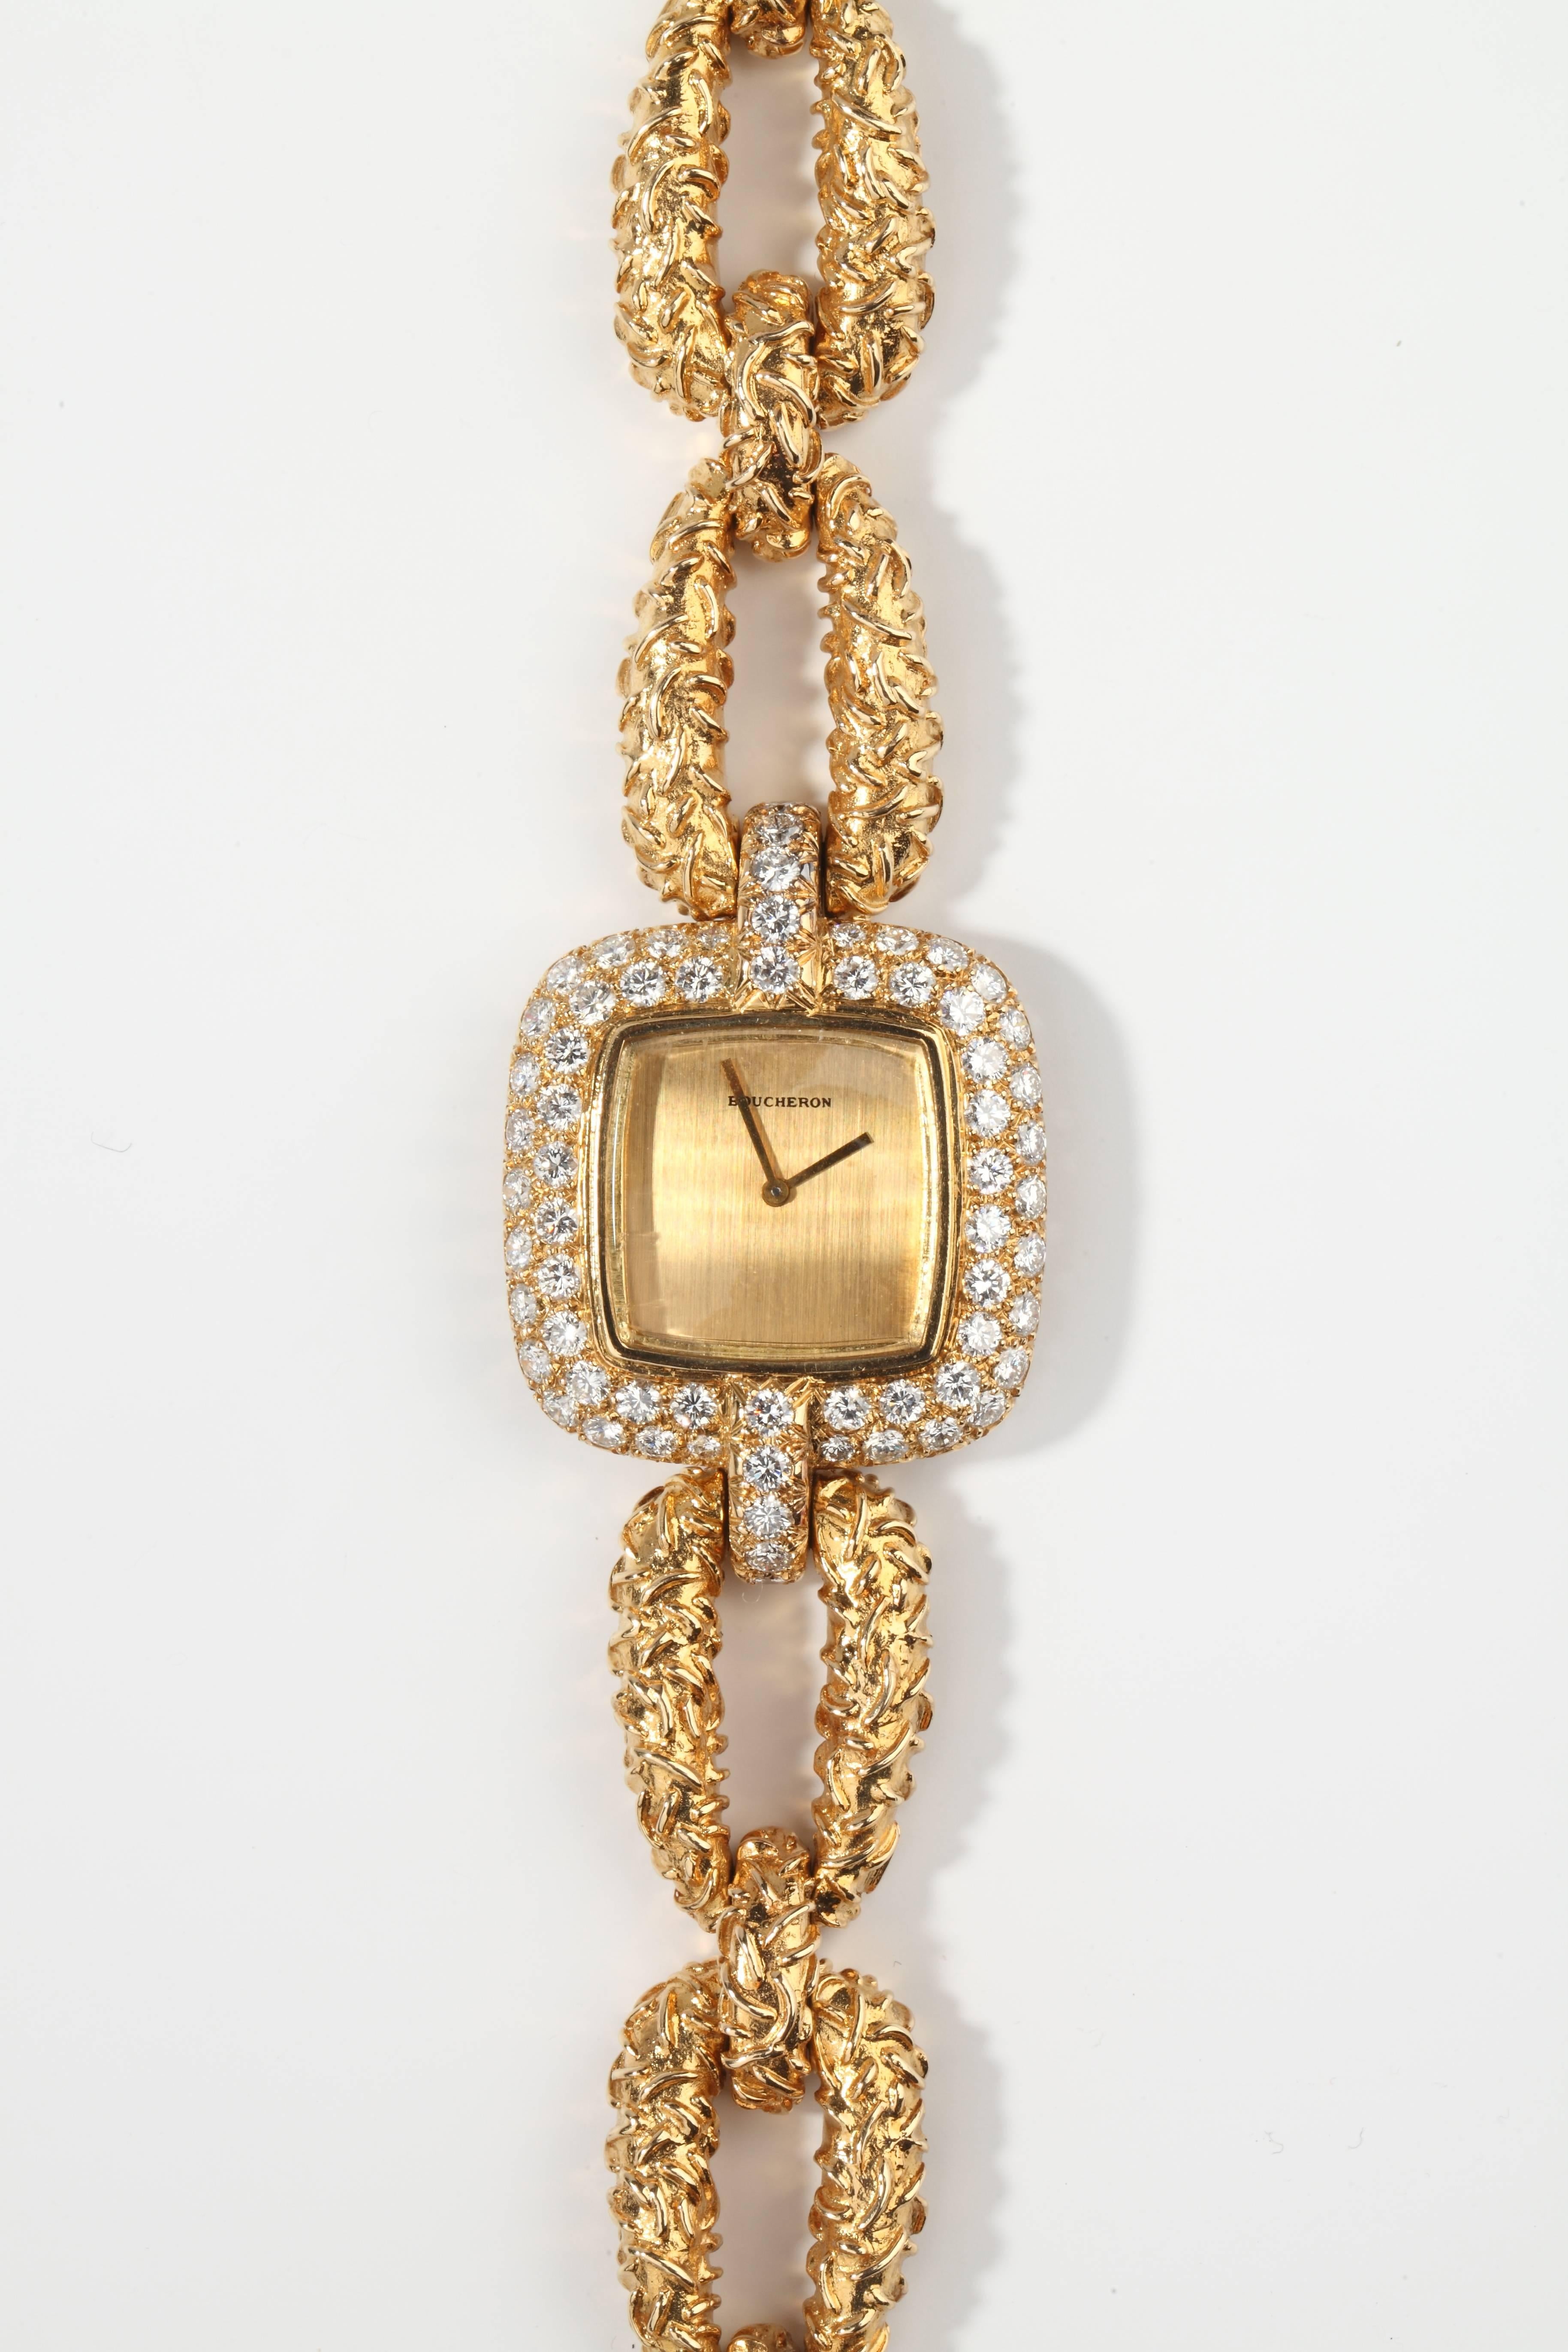 Square designed, golden dial, glasses set by two lines of brillant-cut diamonds (around 2.65 ct). The bracelet formed of textured gold links.
Mechanical movement.
Dial and case signed BOUCHERON.
French assay marks for gold and Boucheron.
